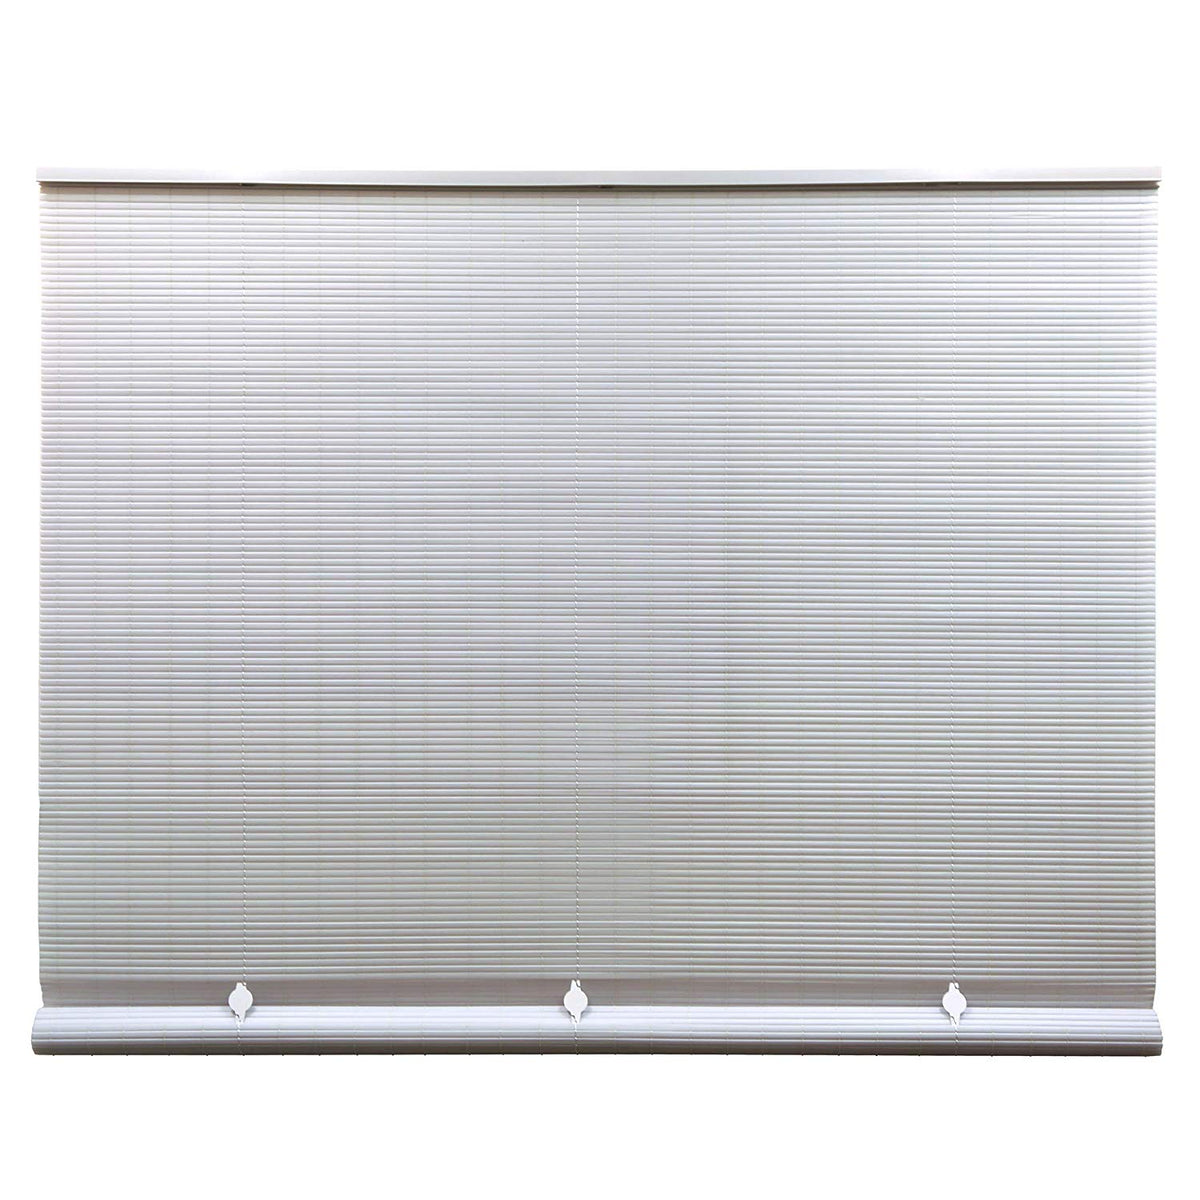 Lewis Hyman 3320146 Cord Free 1/4" Oval Roll Up Blind PVC Shade, White, 48"x72"